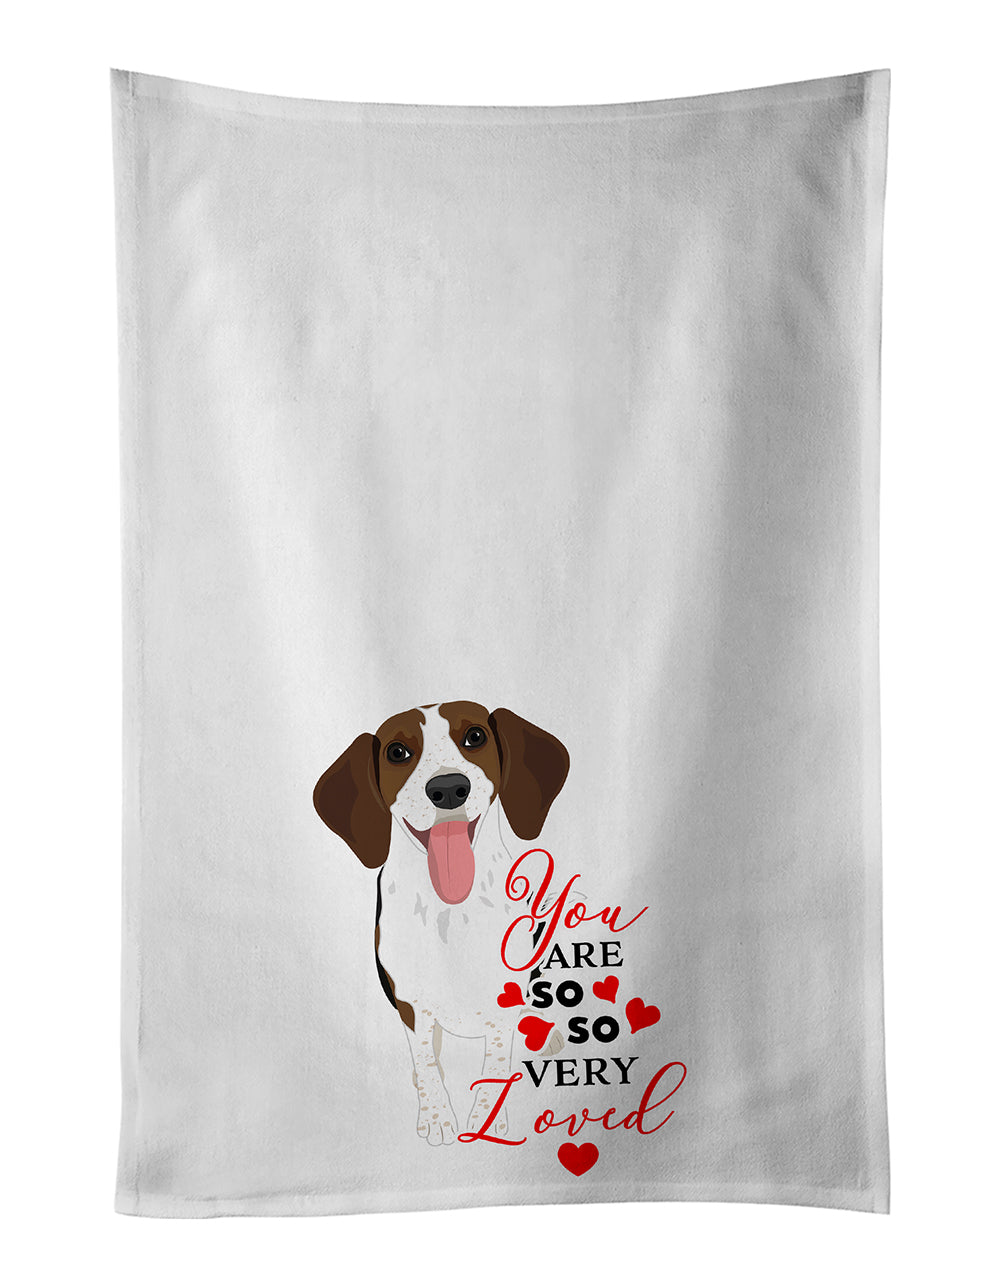 Buy this Beagle Tricolor Red Ticked #3 so Loved White Kitchen Towel Set of 2